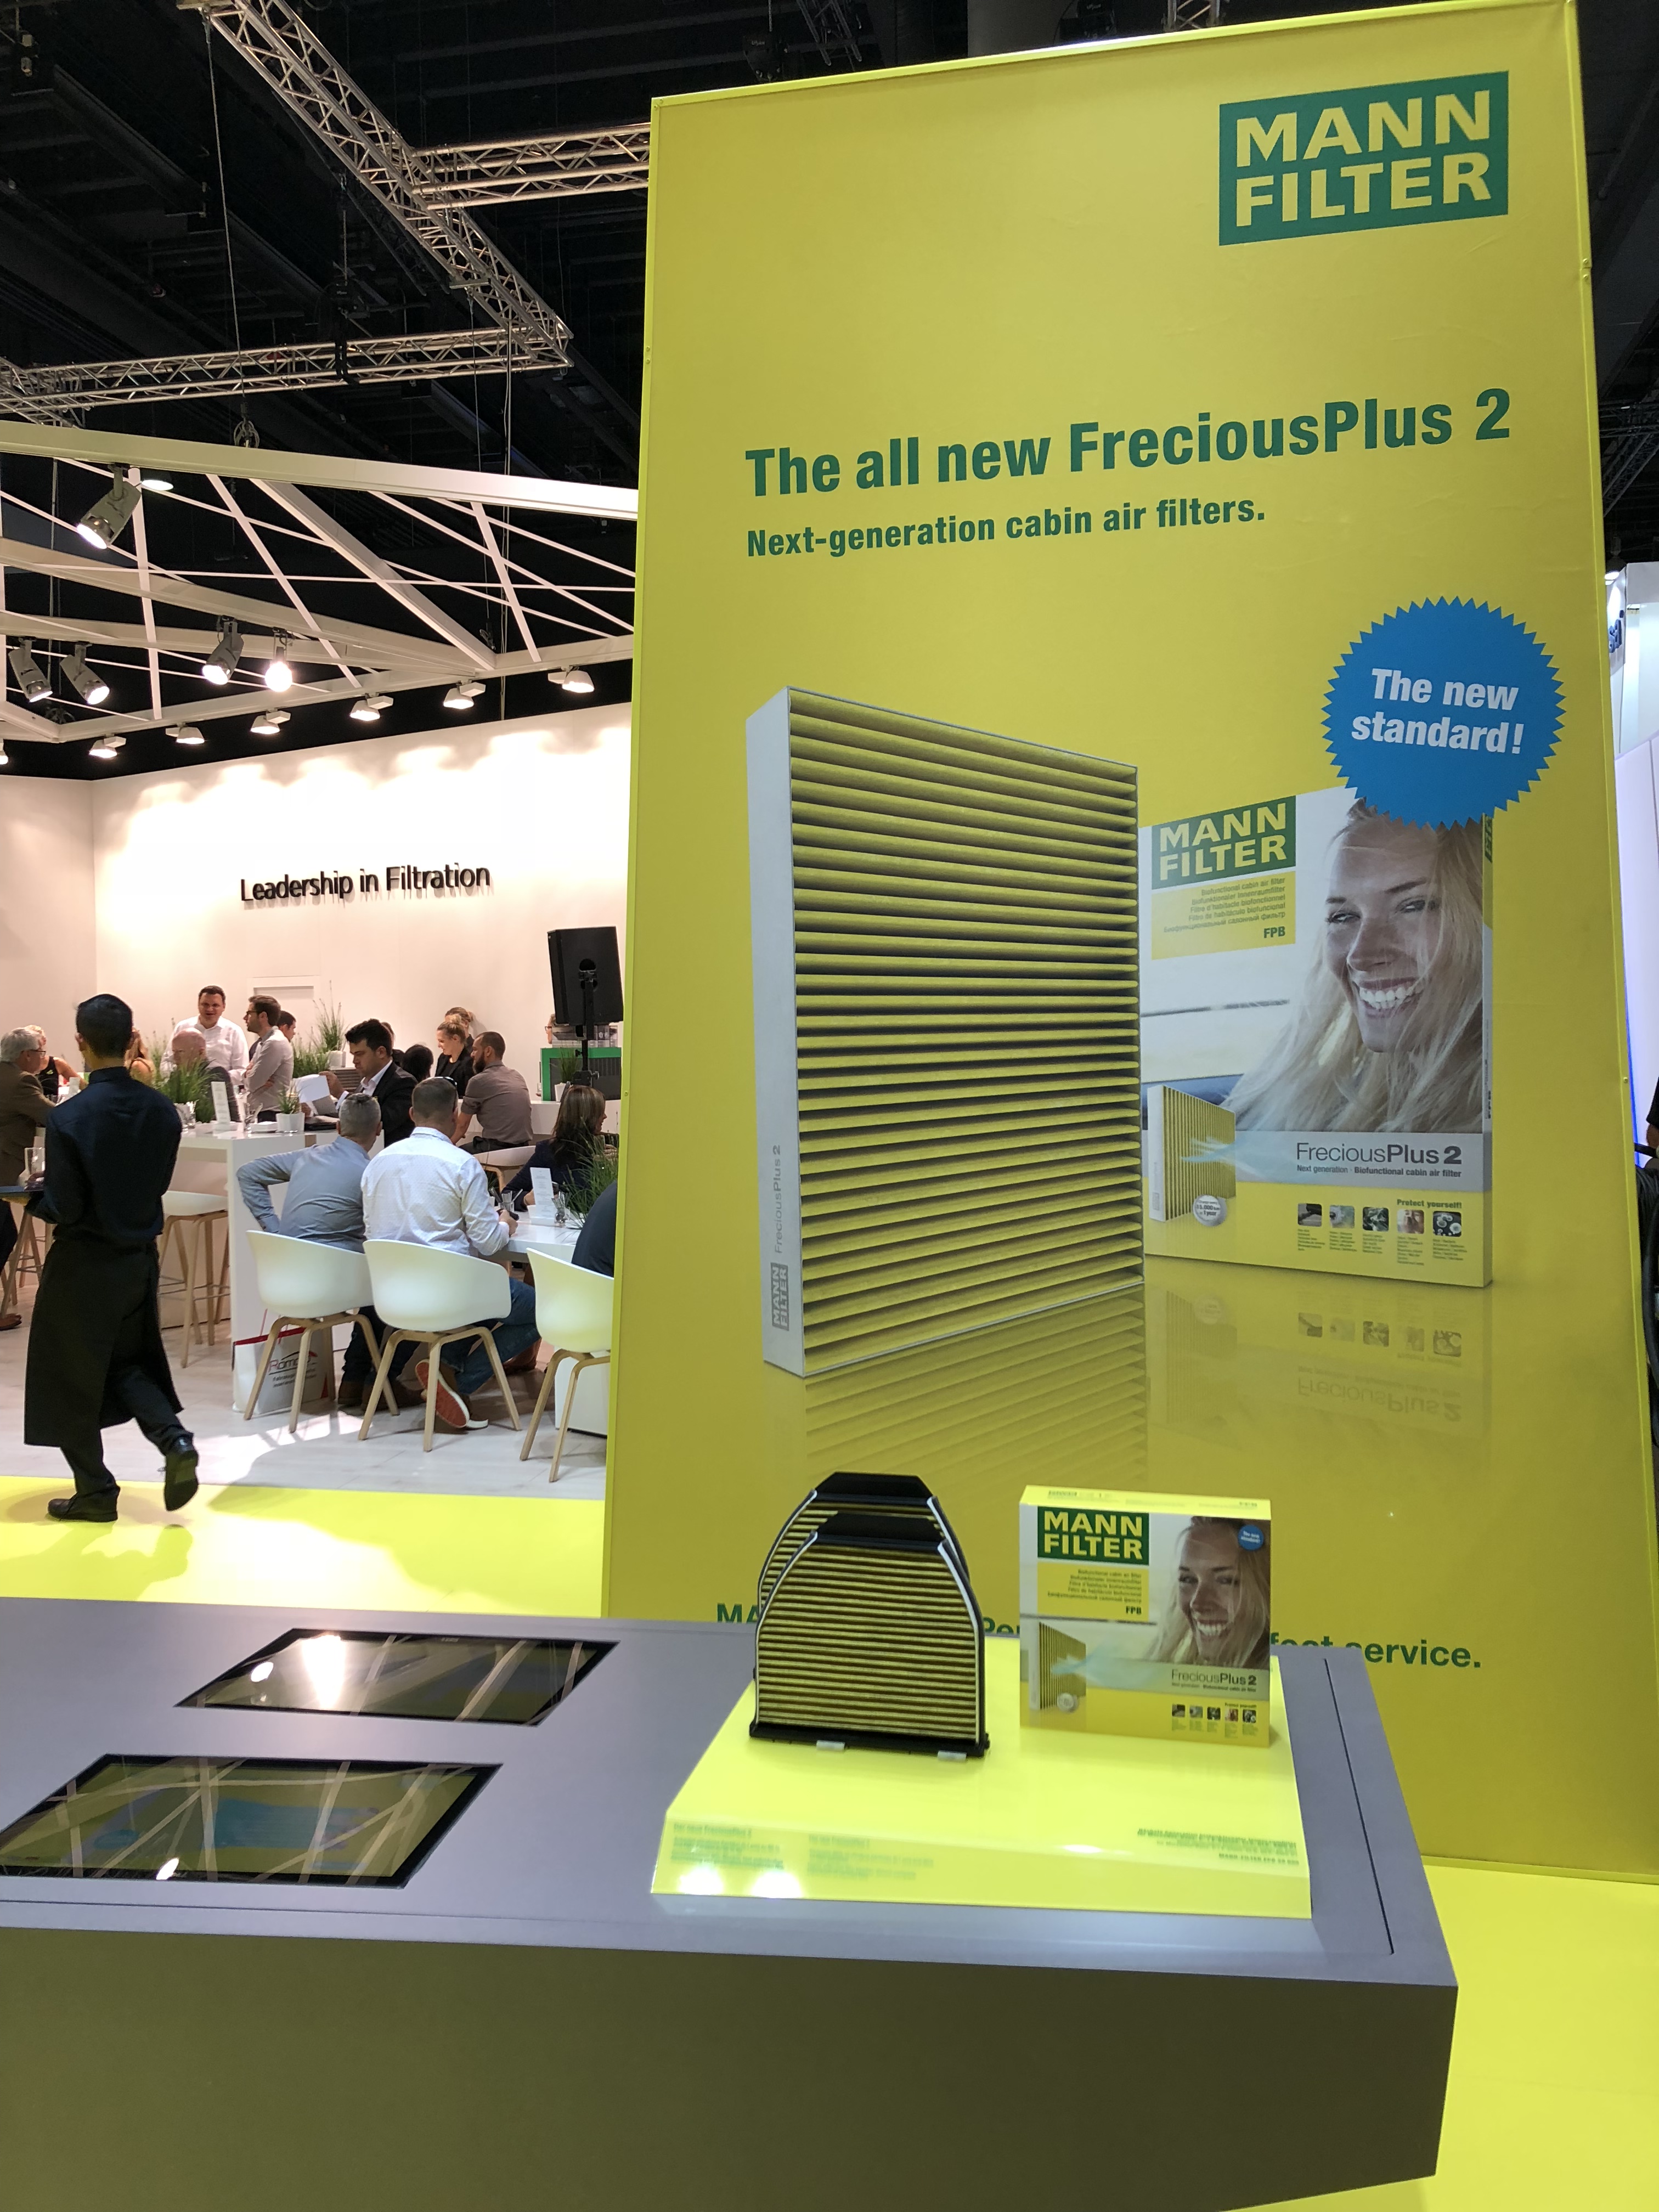 A yellow and green booth with a poster and a product